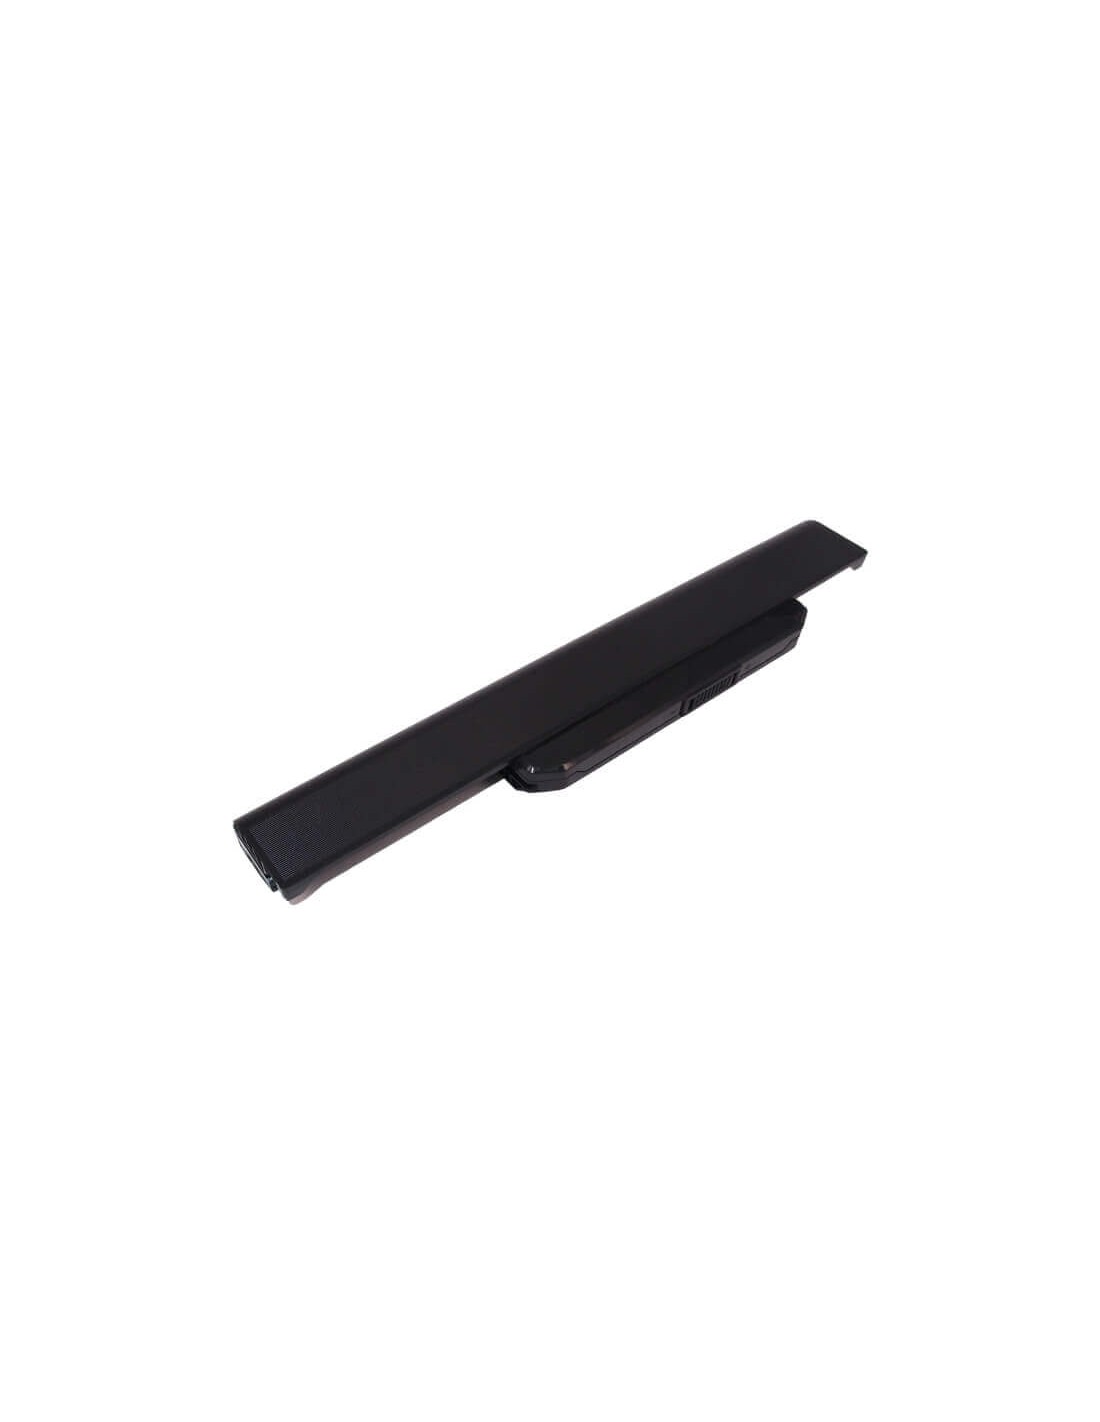 Black Battery for Asus A53b, A53by, A53e 11.1V, 4400mAh - 48.84Wh